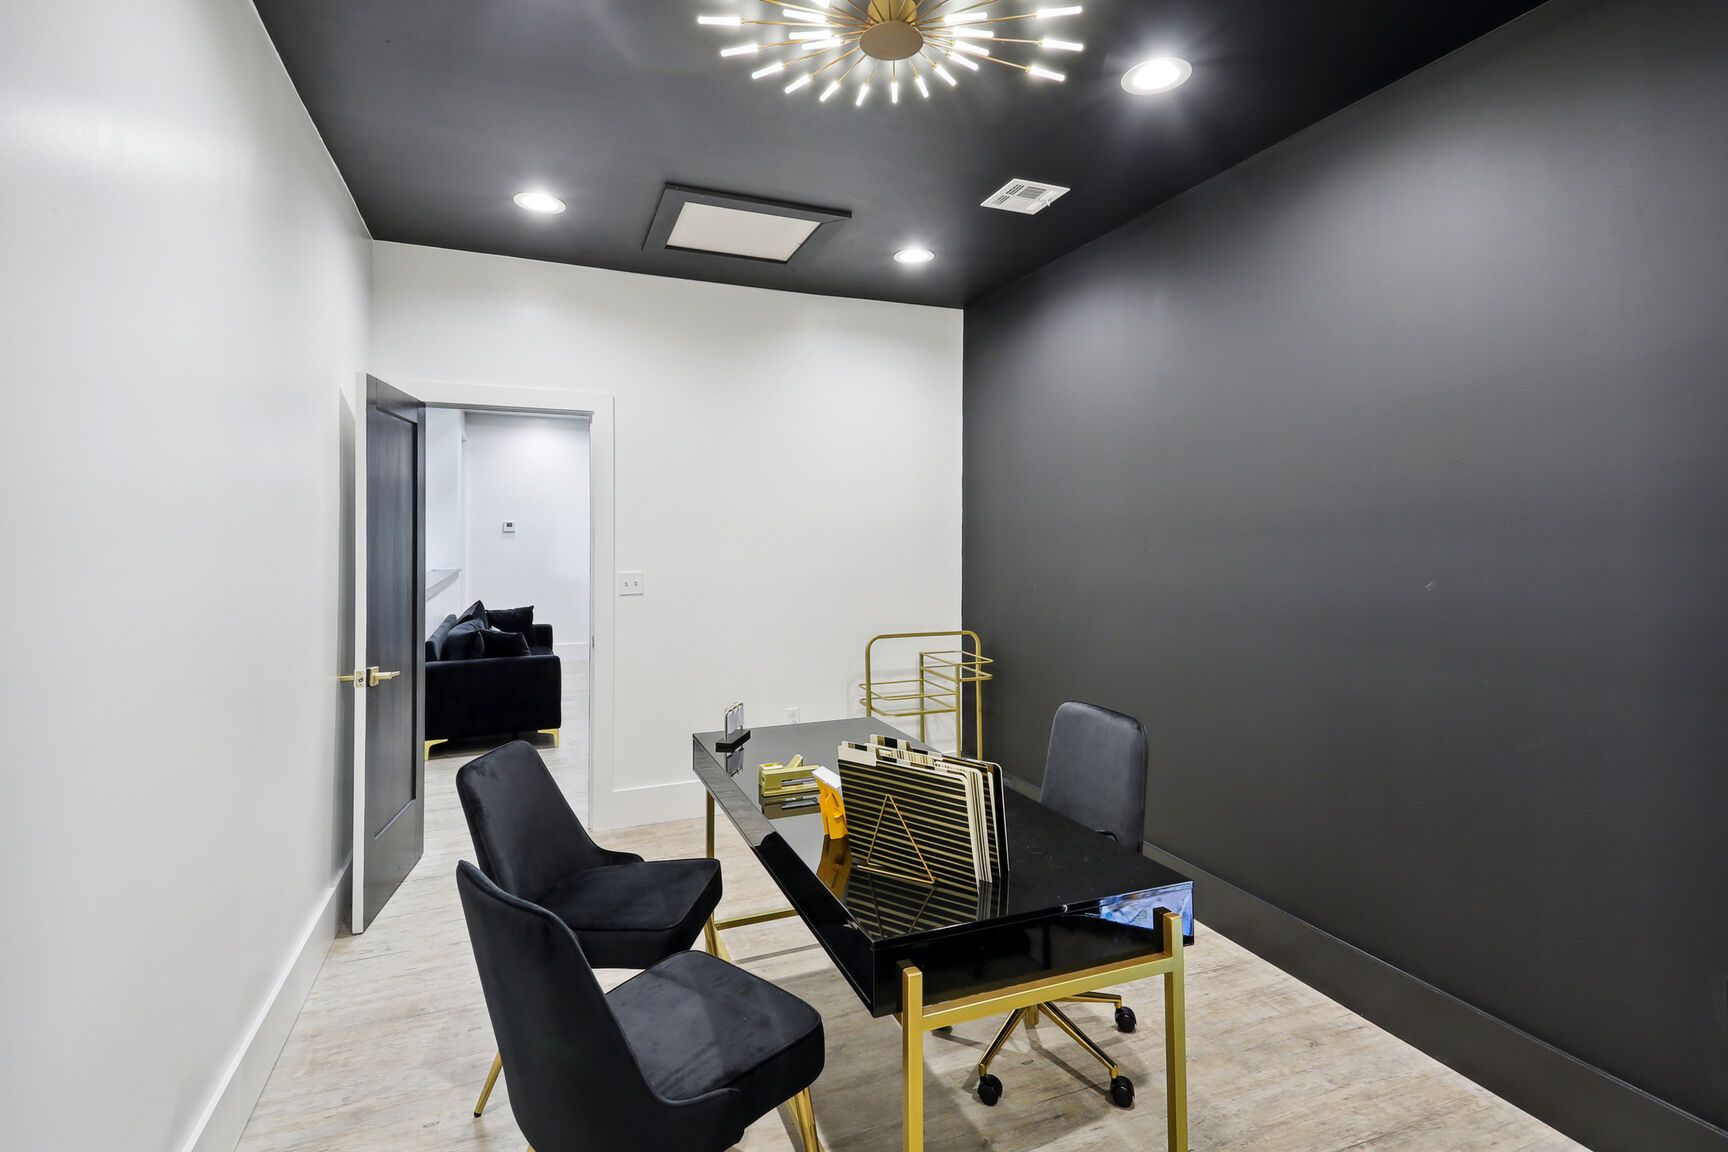 KP Salon interior office area designed and built by DMG's commercial construction division